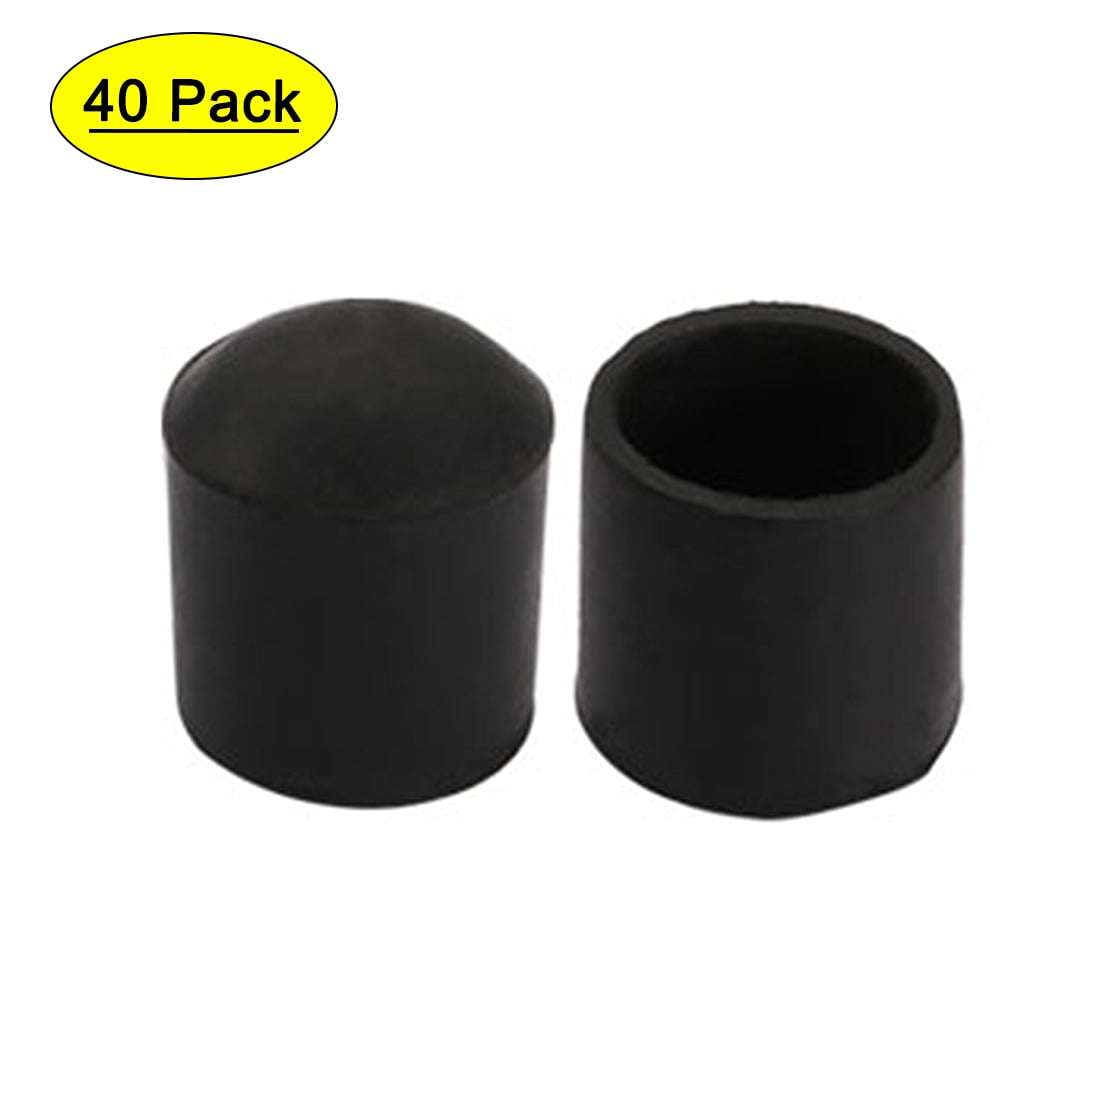 22 Or 25mm 19 TIC EXTERNAL CHAIR TIP 8Pcs Round Reduces Noise BLACK Rubber-16 